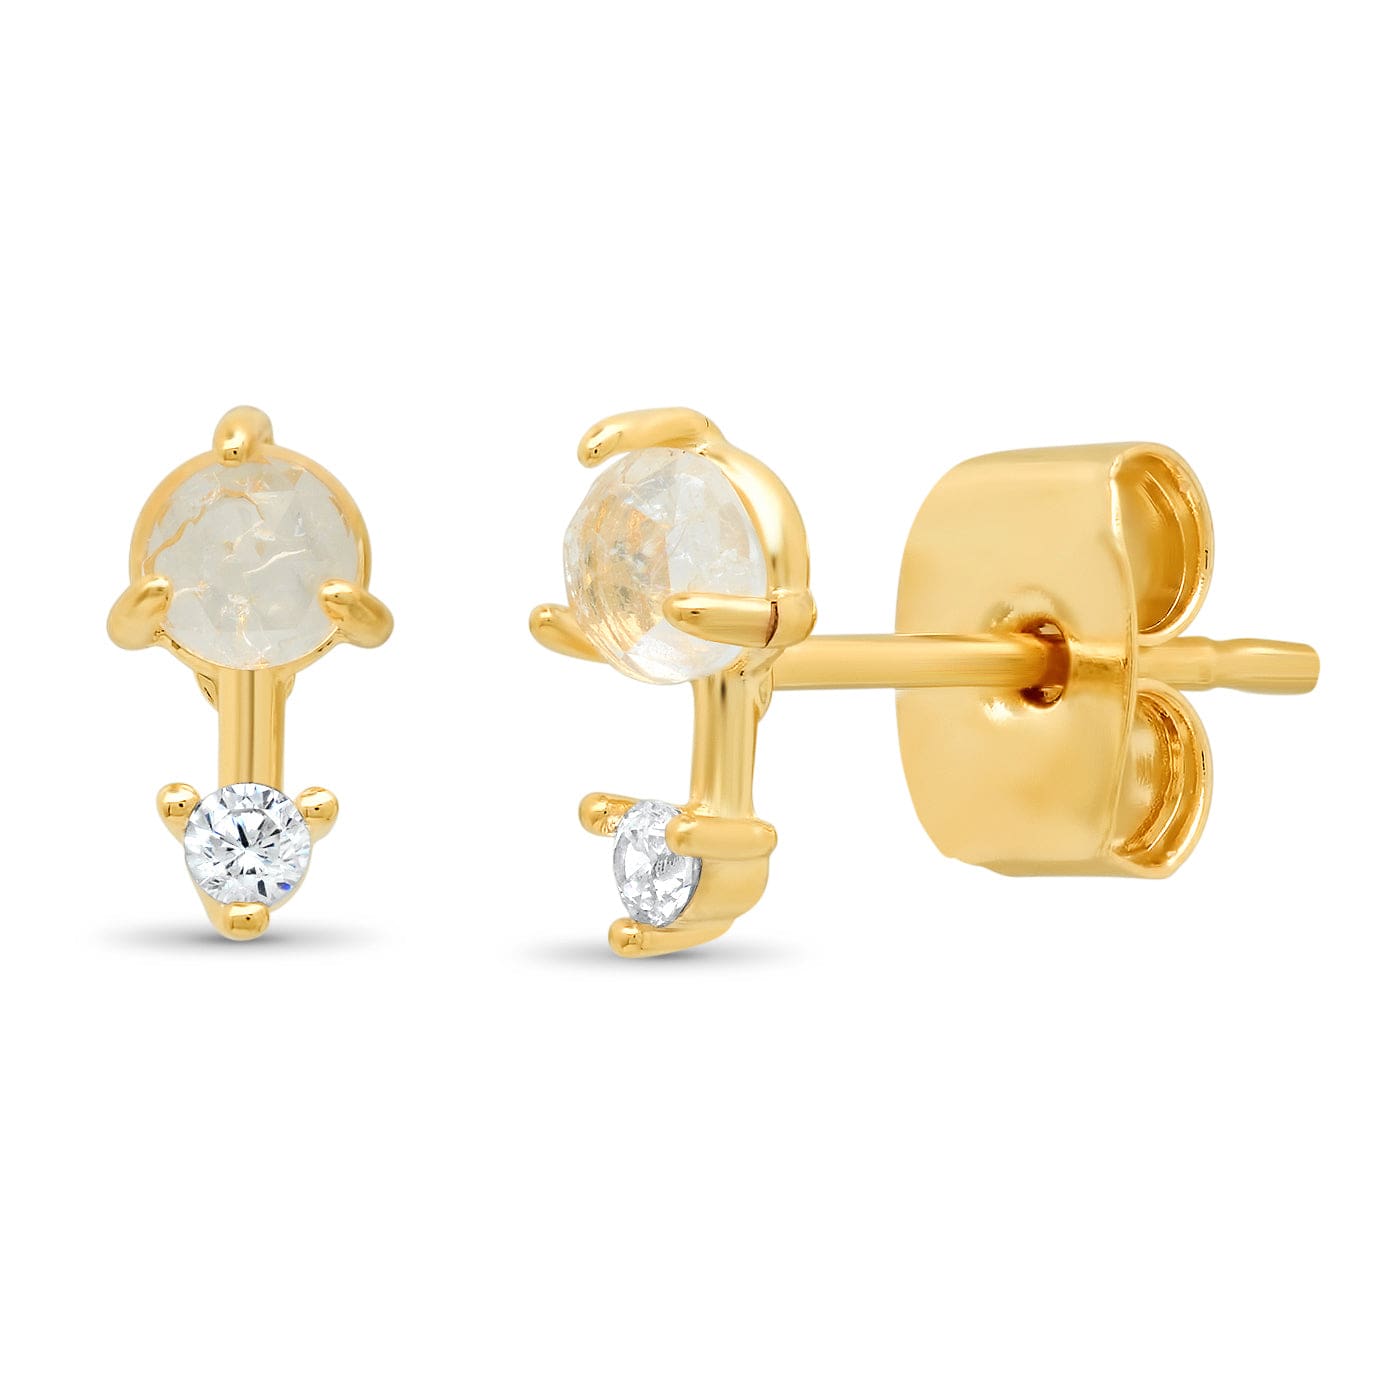 TAI JEWELRY Earrings Clear Rock Crystal Stud With Gold Bar And Cz Accent